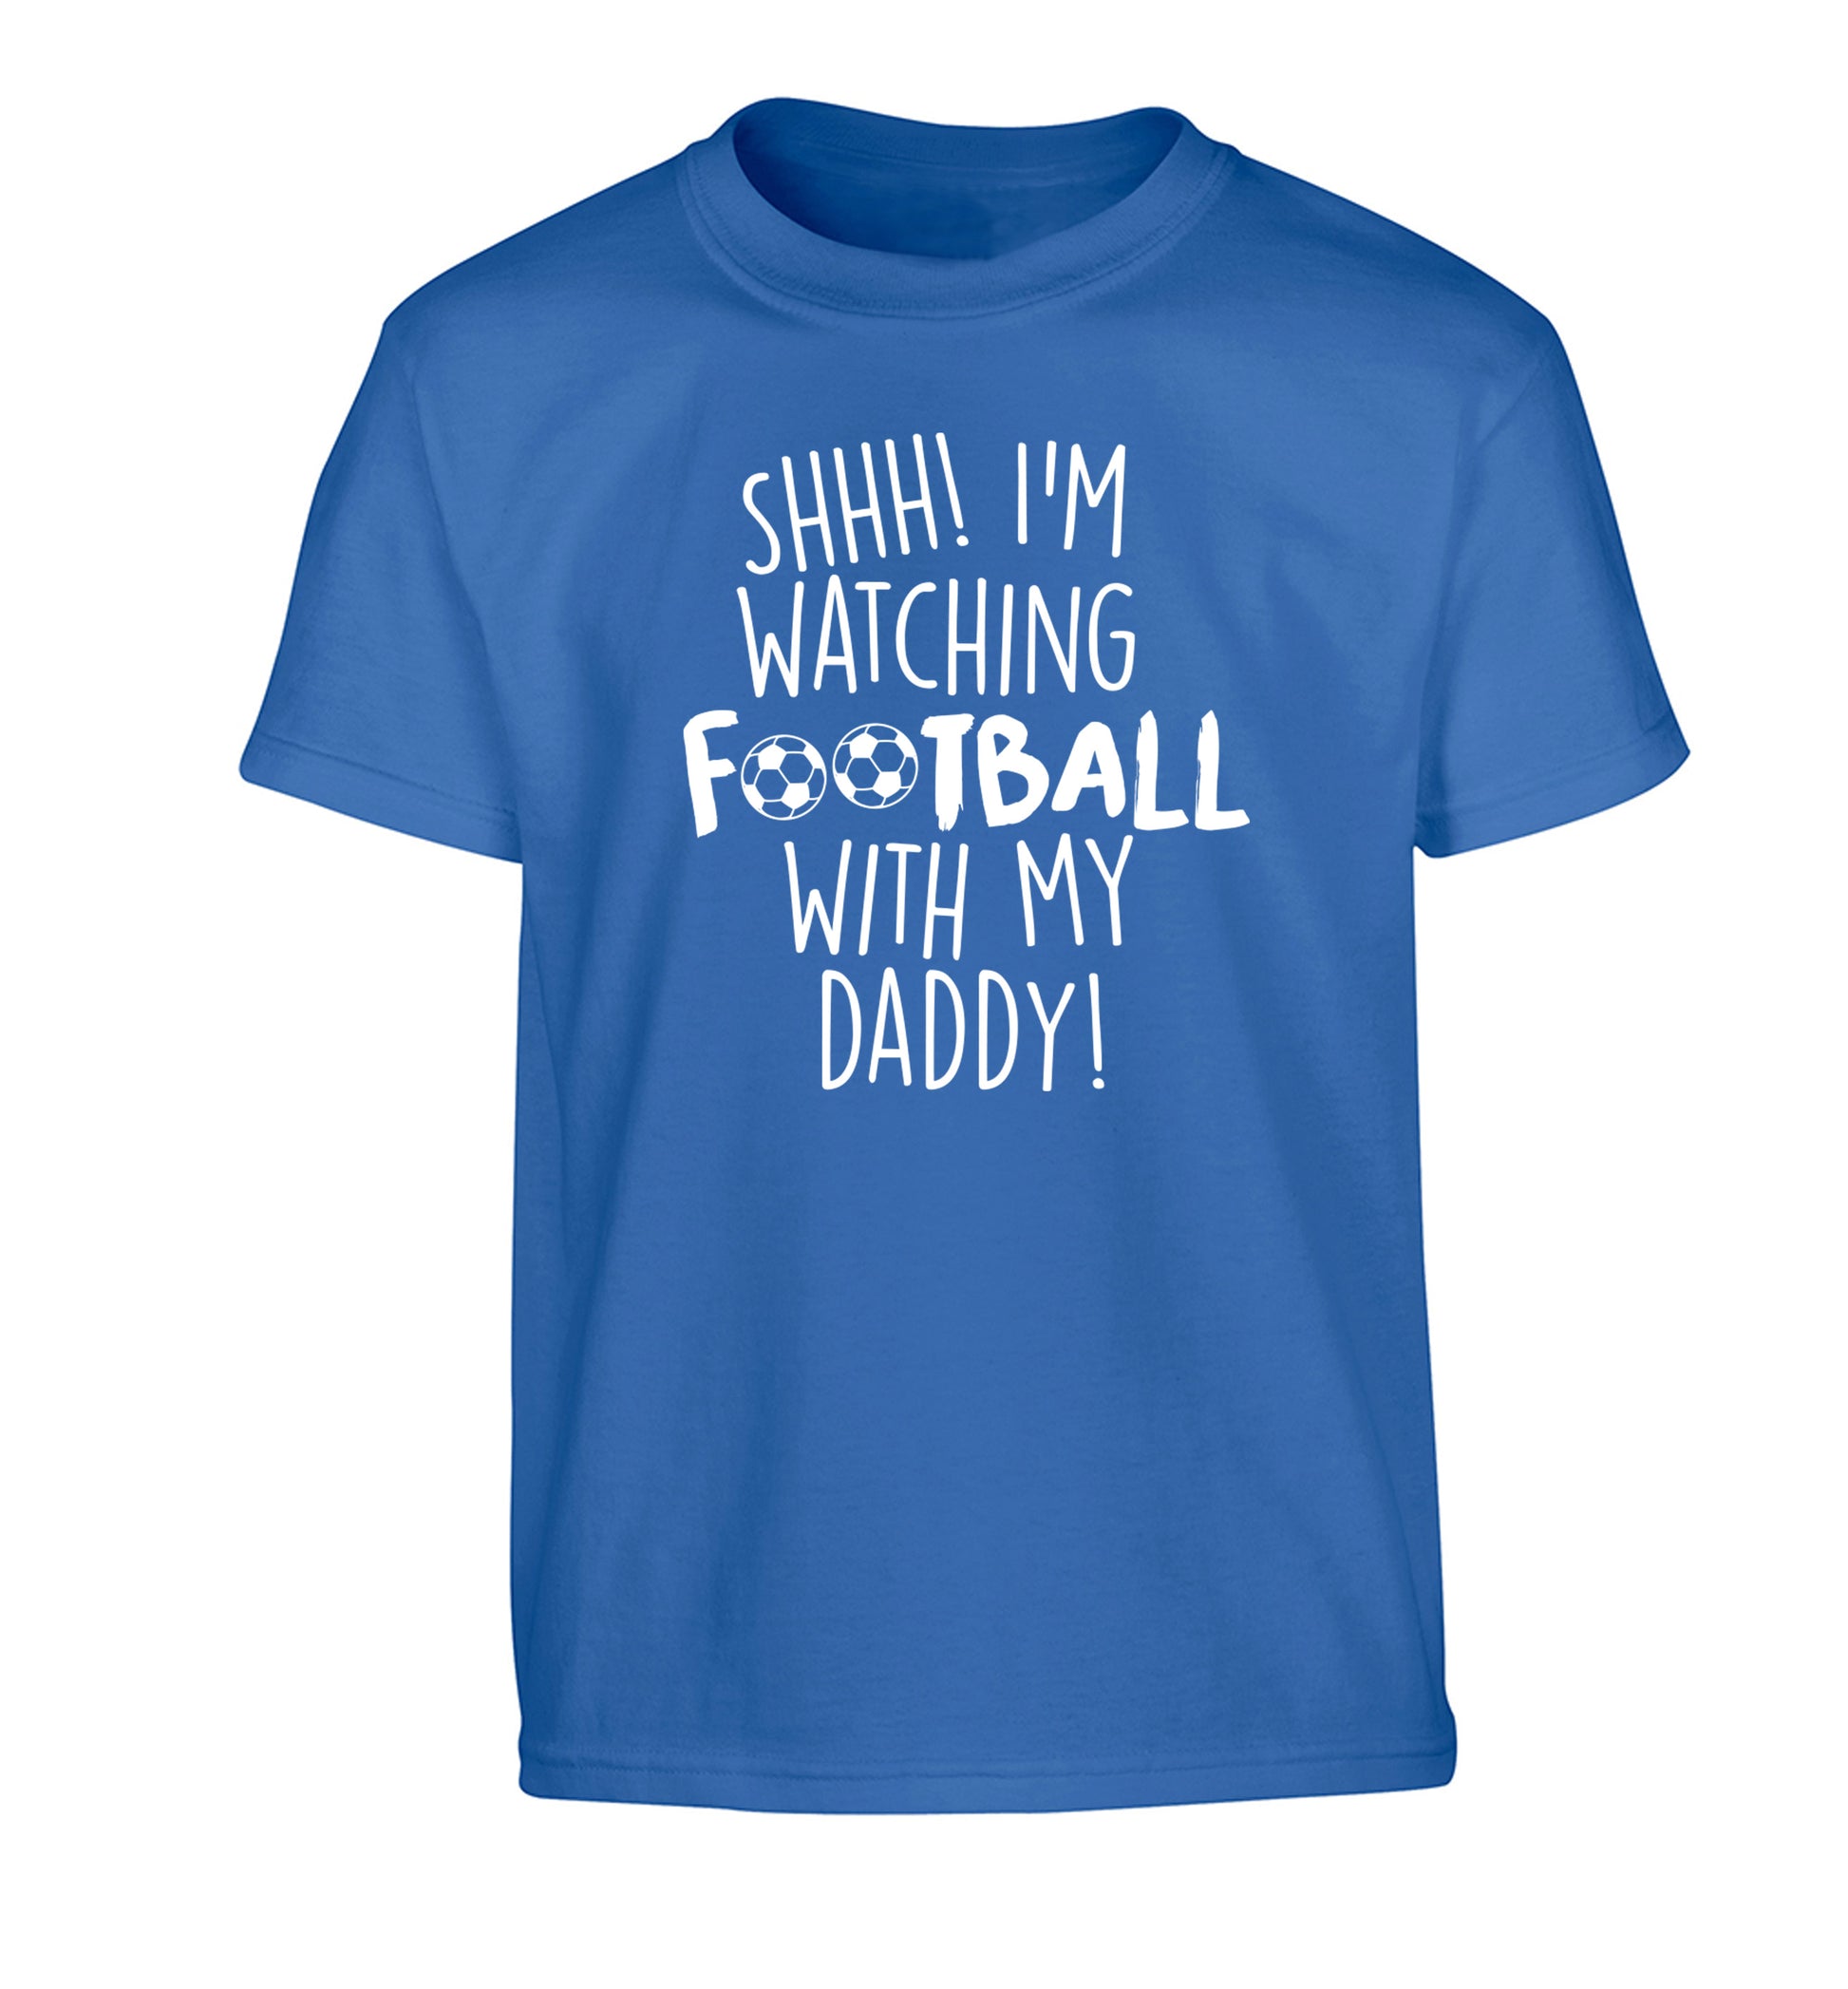 Shhh I'm watching football with my daddy Children's blue Tshirt 12-14 Years